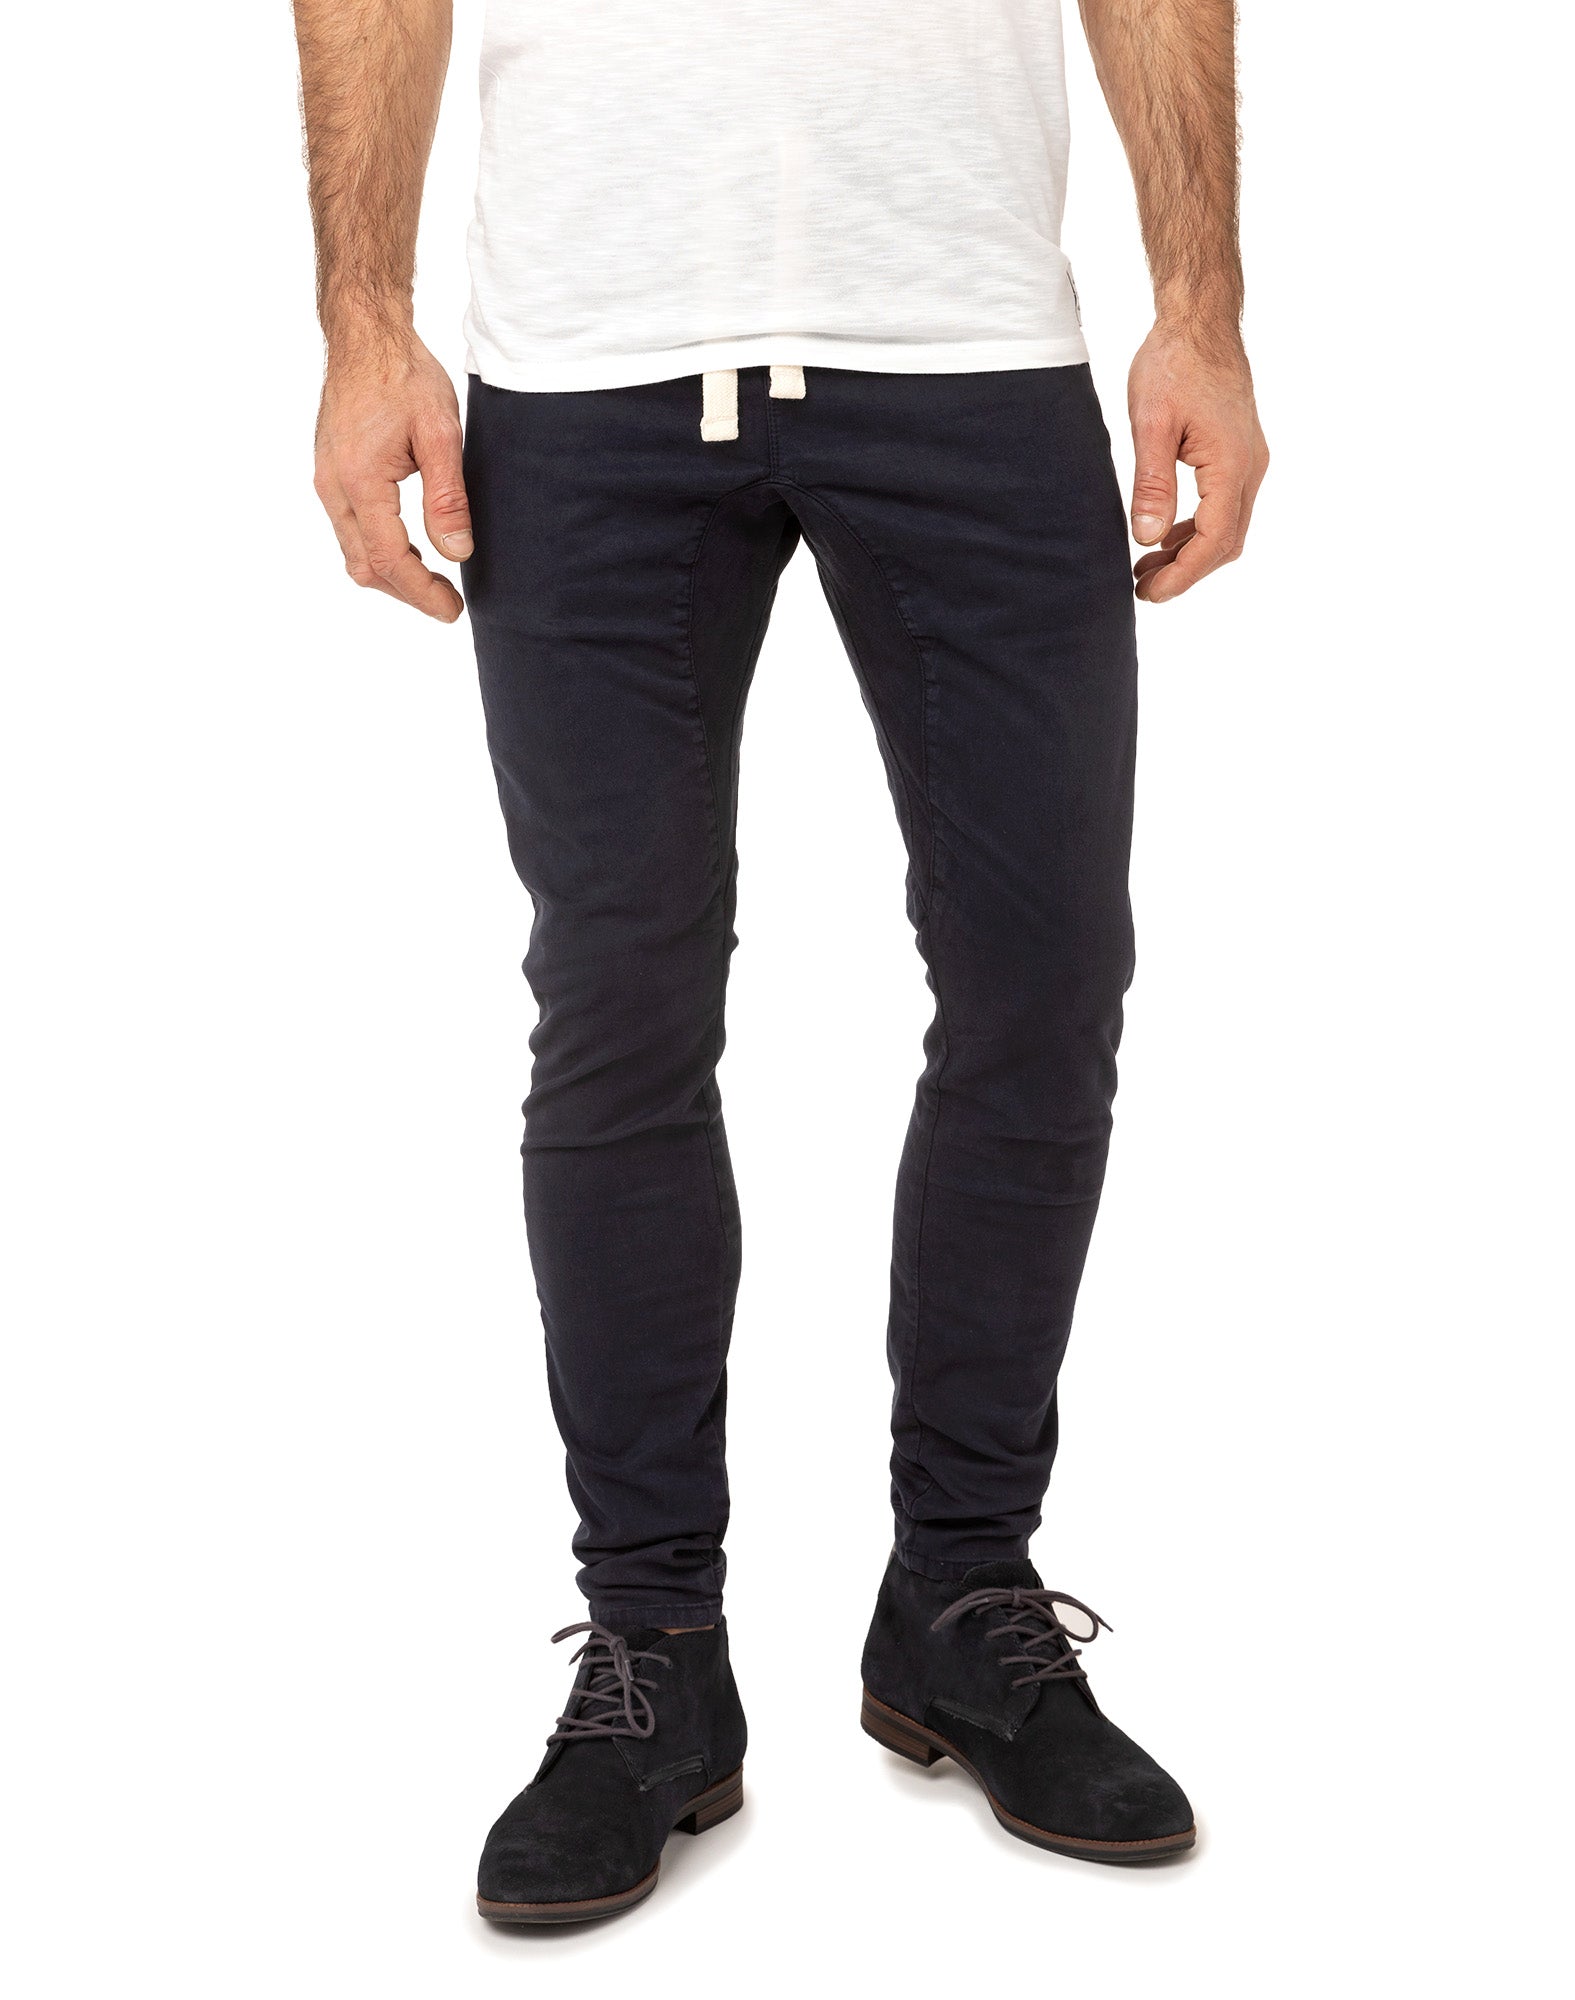 Dening epic2 tapered joggers